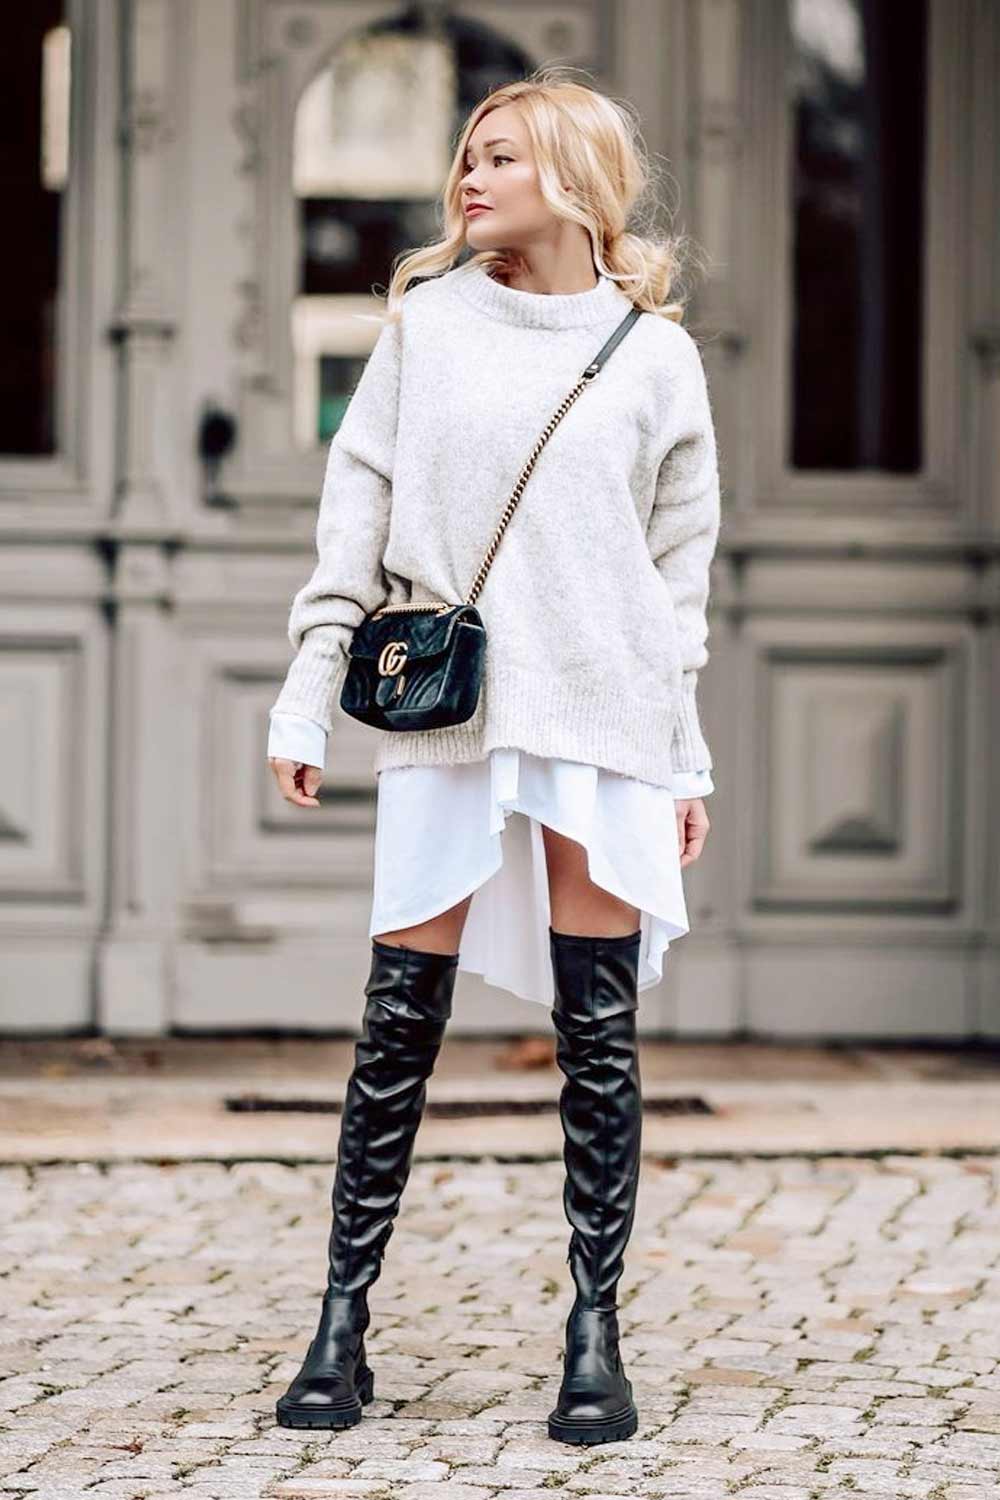 Sweater with Dress Underneath Outfits